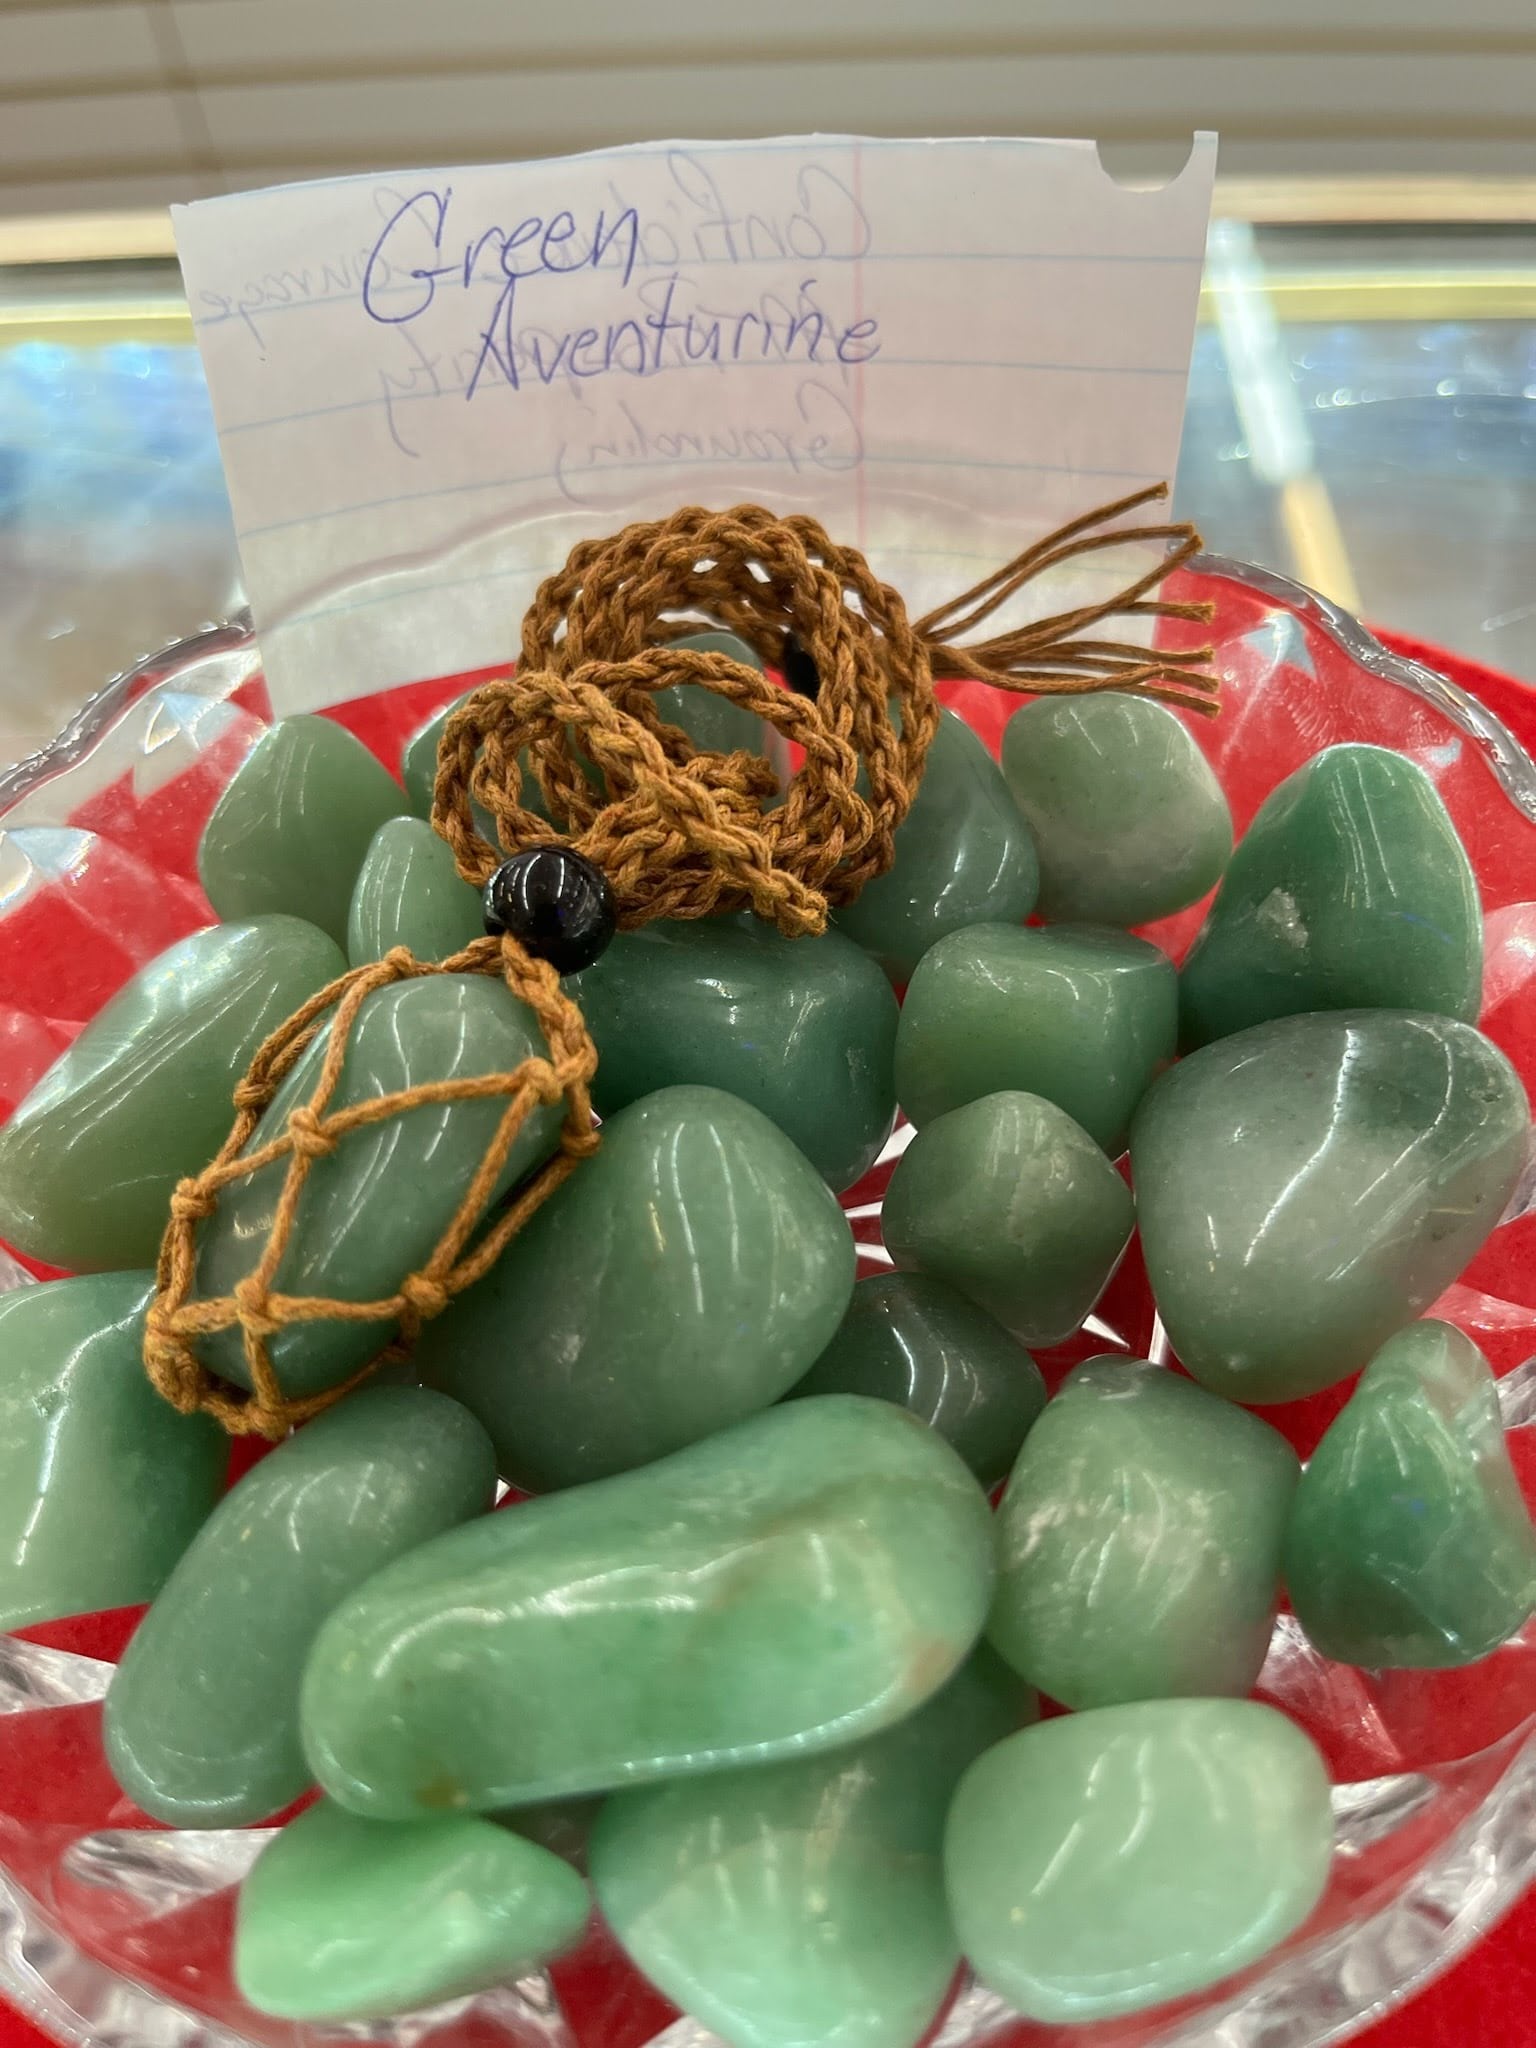 A bowl of green aventurine rocks and beads.